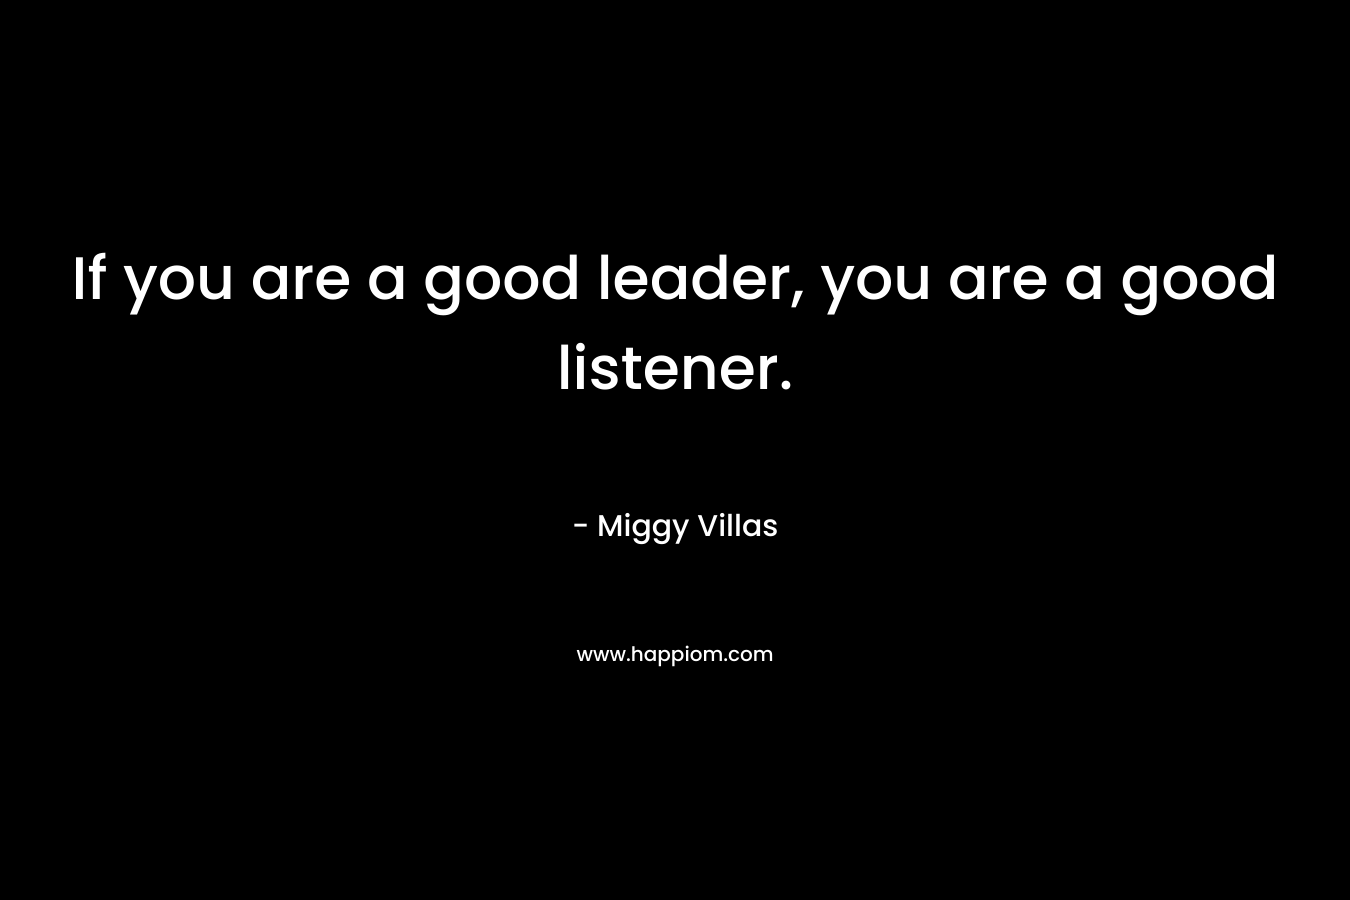 If you are a good leader, you are a good listener.